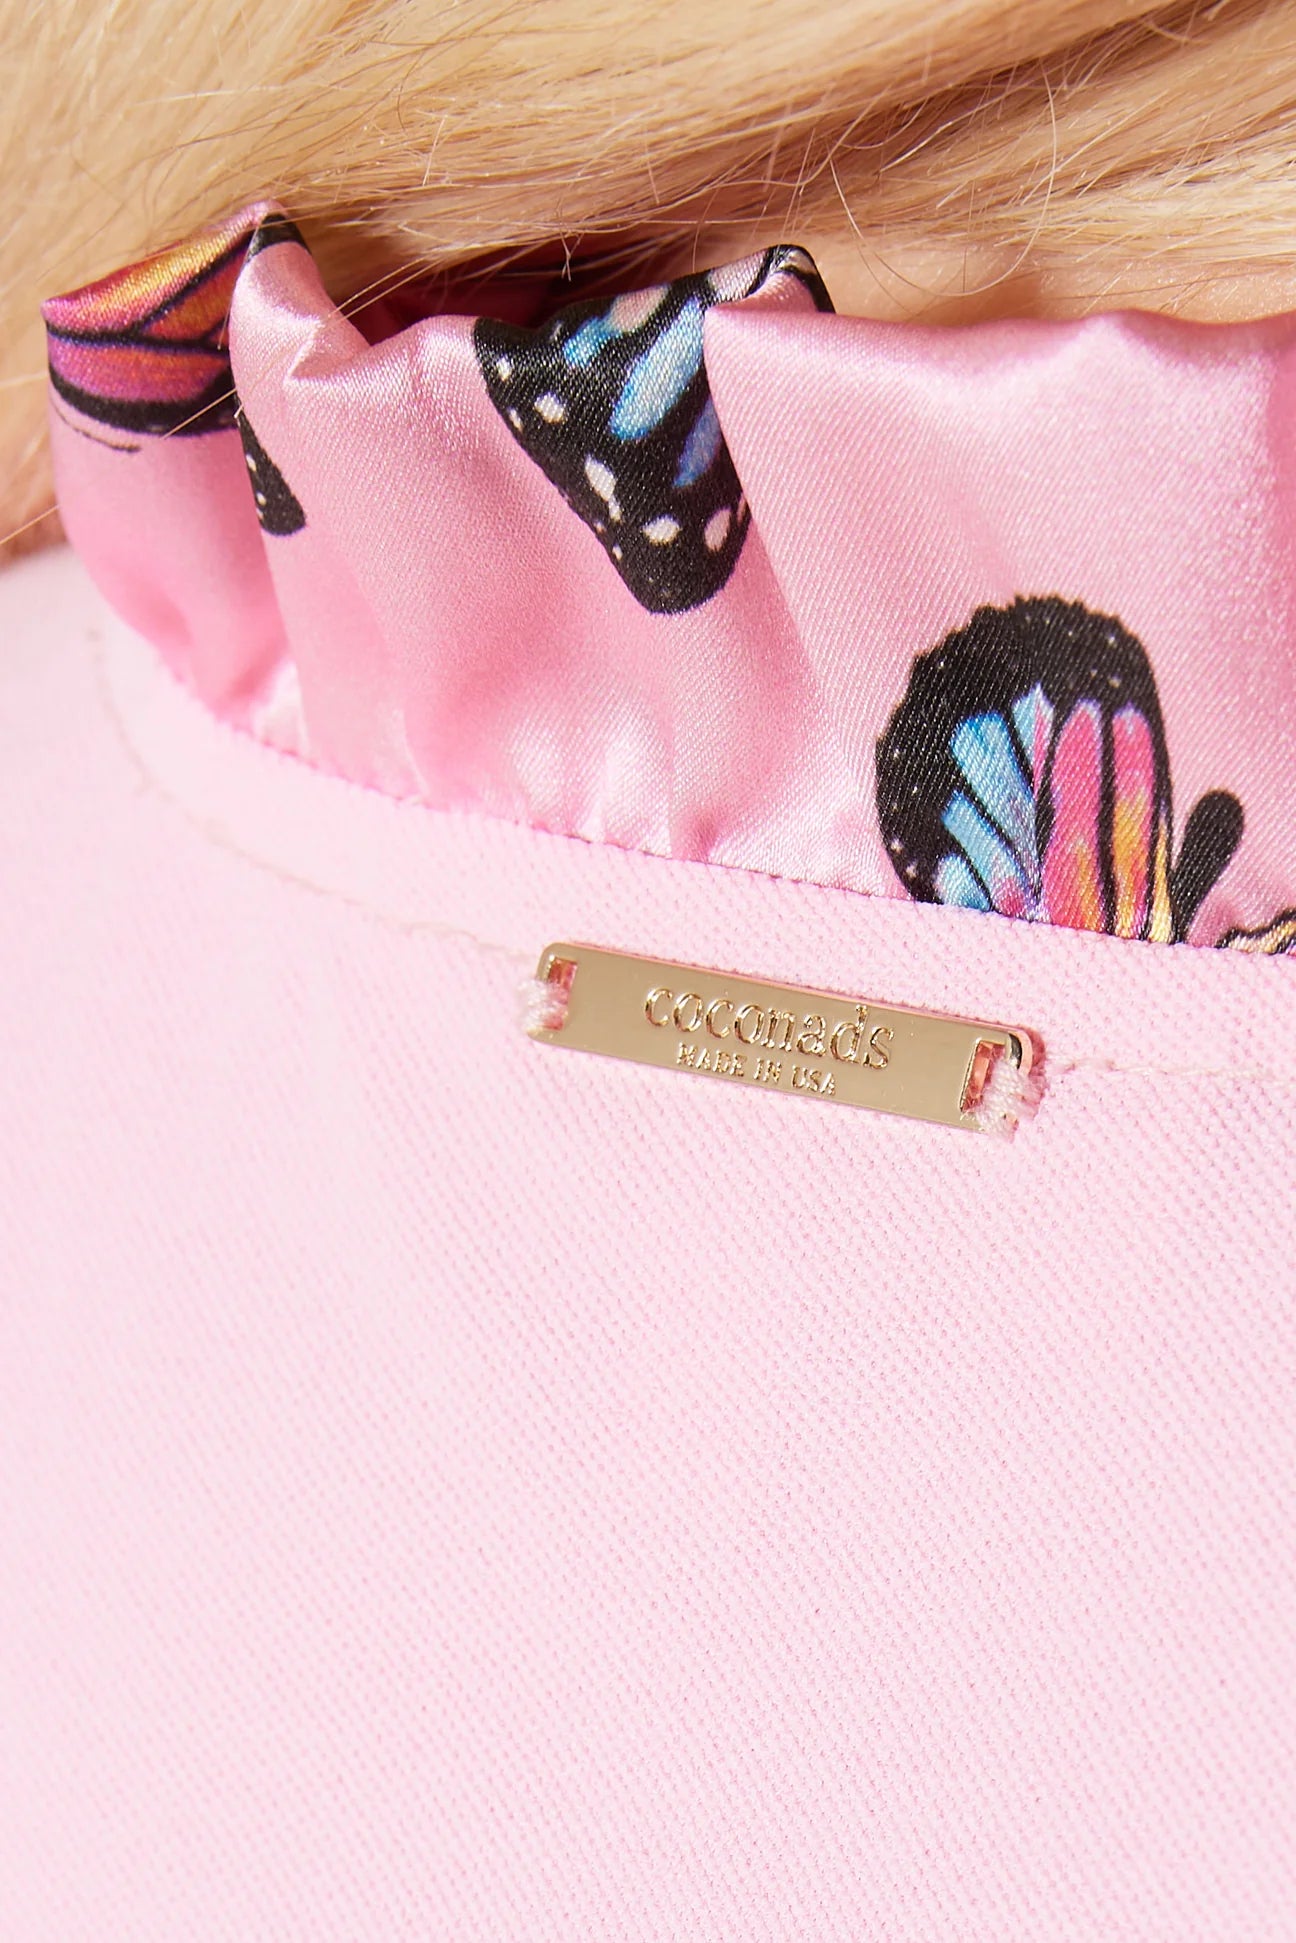 Wing Woman V-Neck Top - Pink & Pink Butterfly